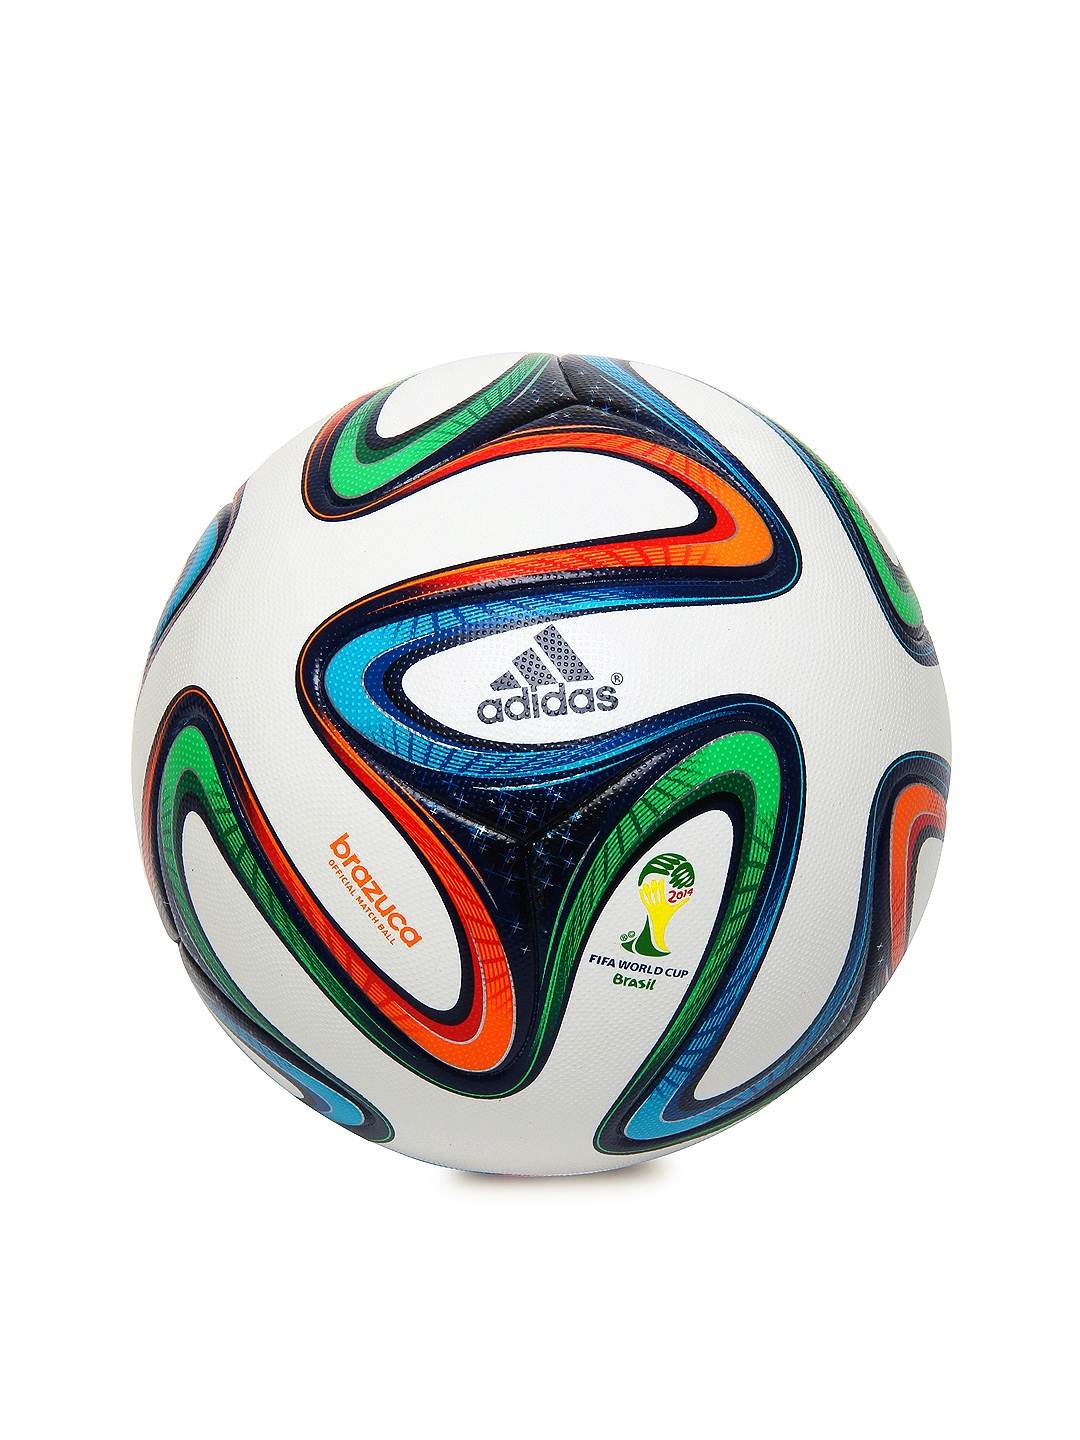 adidas brazuca 2014 world cup official match ball - production